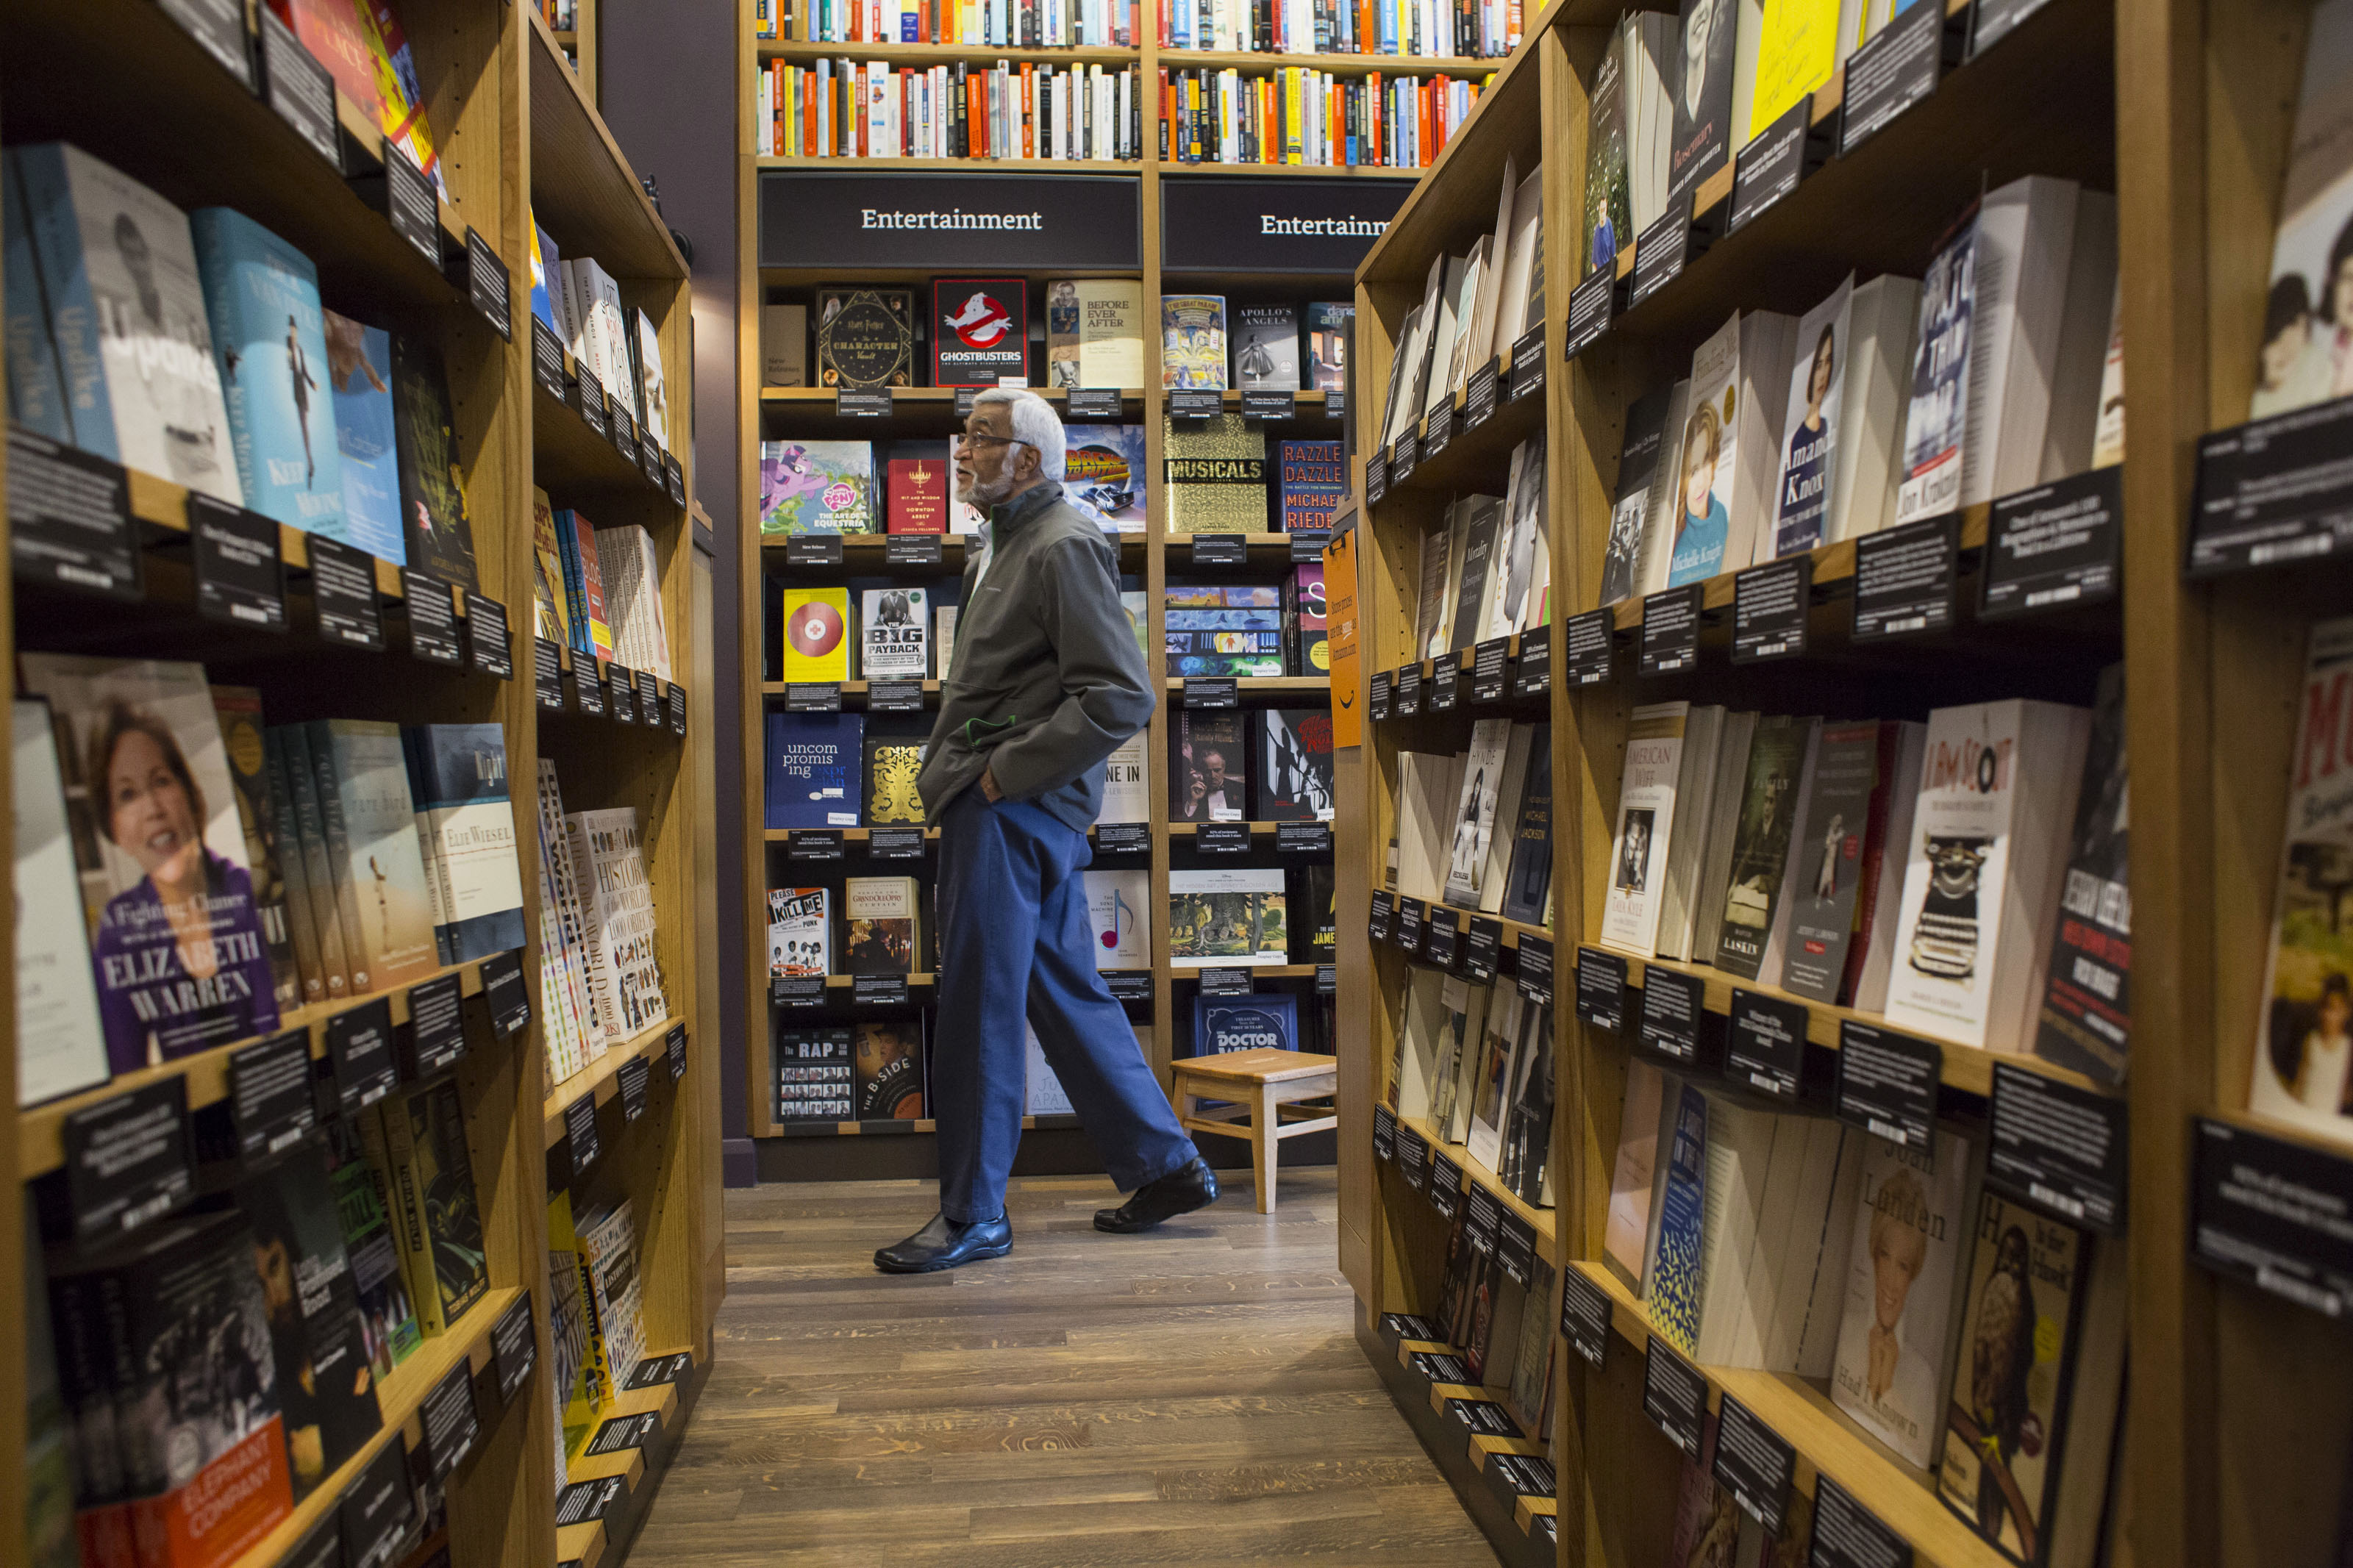 A customer shops at Amazon Books in Seattle, Washington, on Tuesday, Nov. 3, 2015. The online retailer Amazon.com Inc. opened its first brick-and-mortar location in Seattle's upscale University Village mall. Photographer: David Ryder/Bloomberg (David Ryder—© 2015 Bloomberg Finance LP)